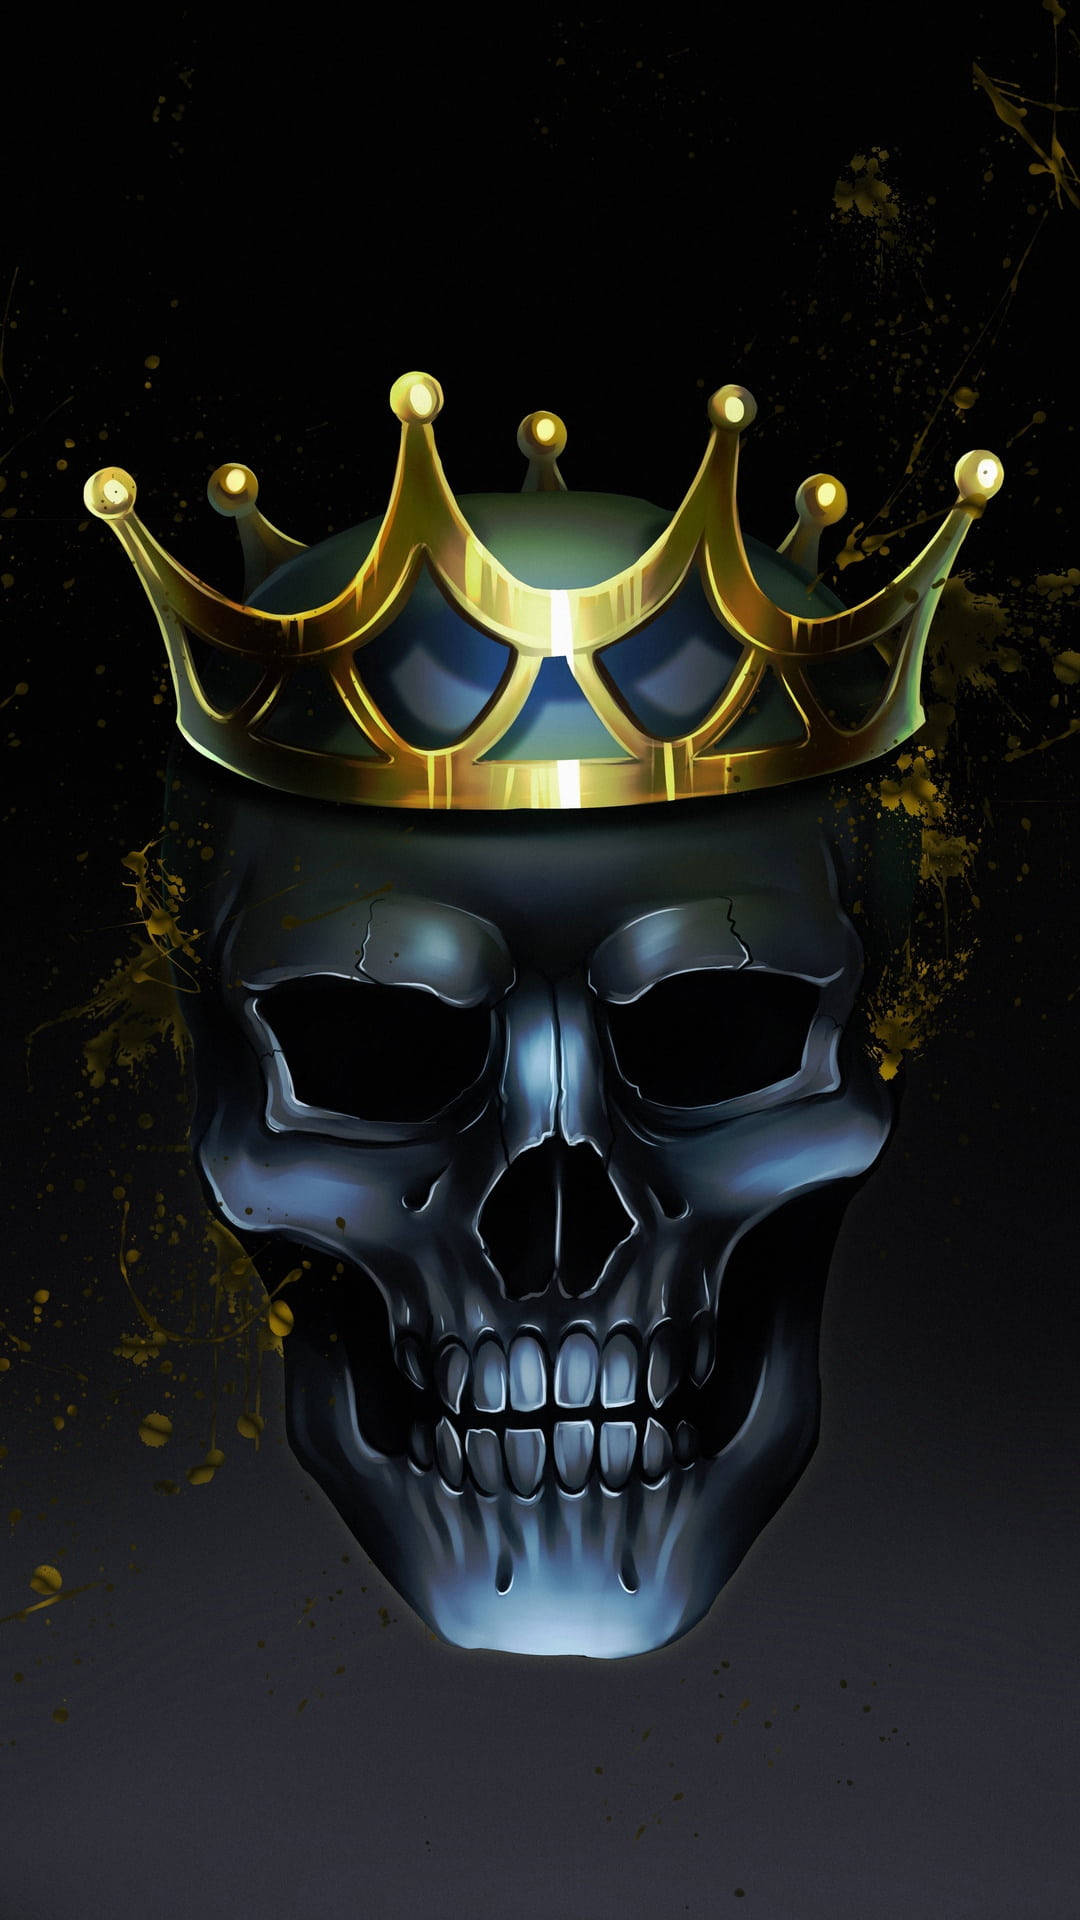 Gangster Skull  IPhone Wallpapers  iPhone Wallpapers